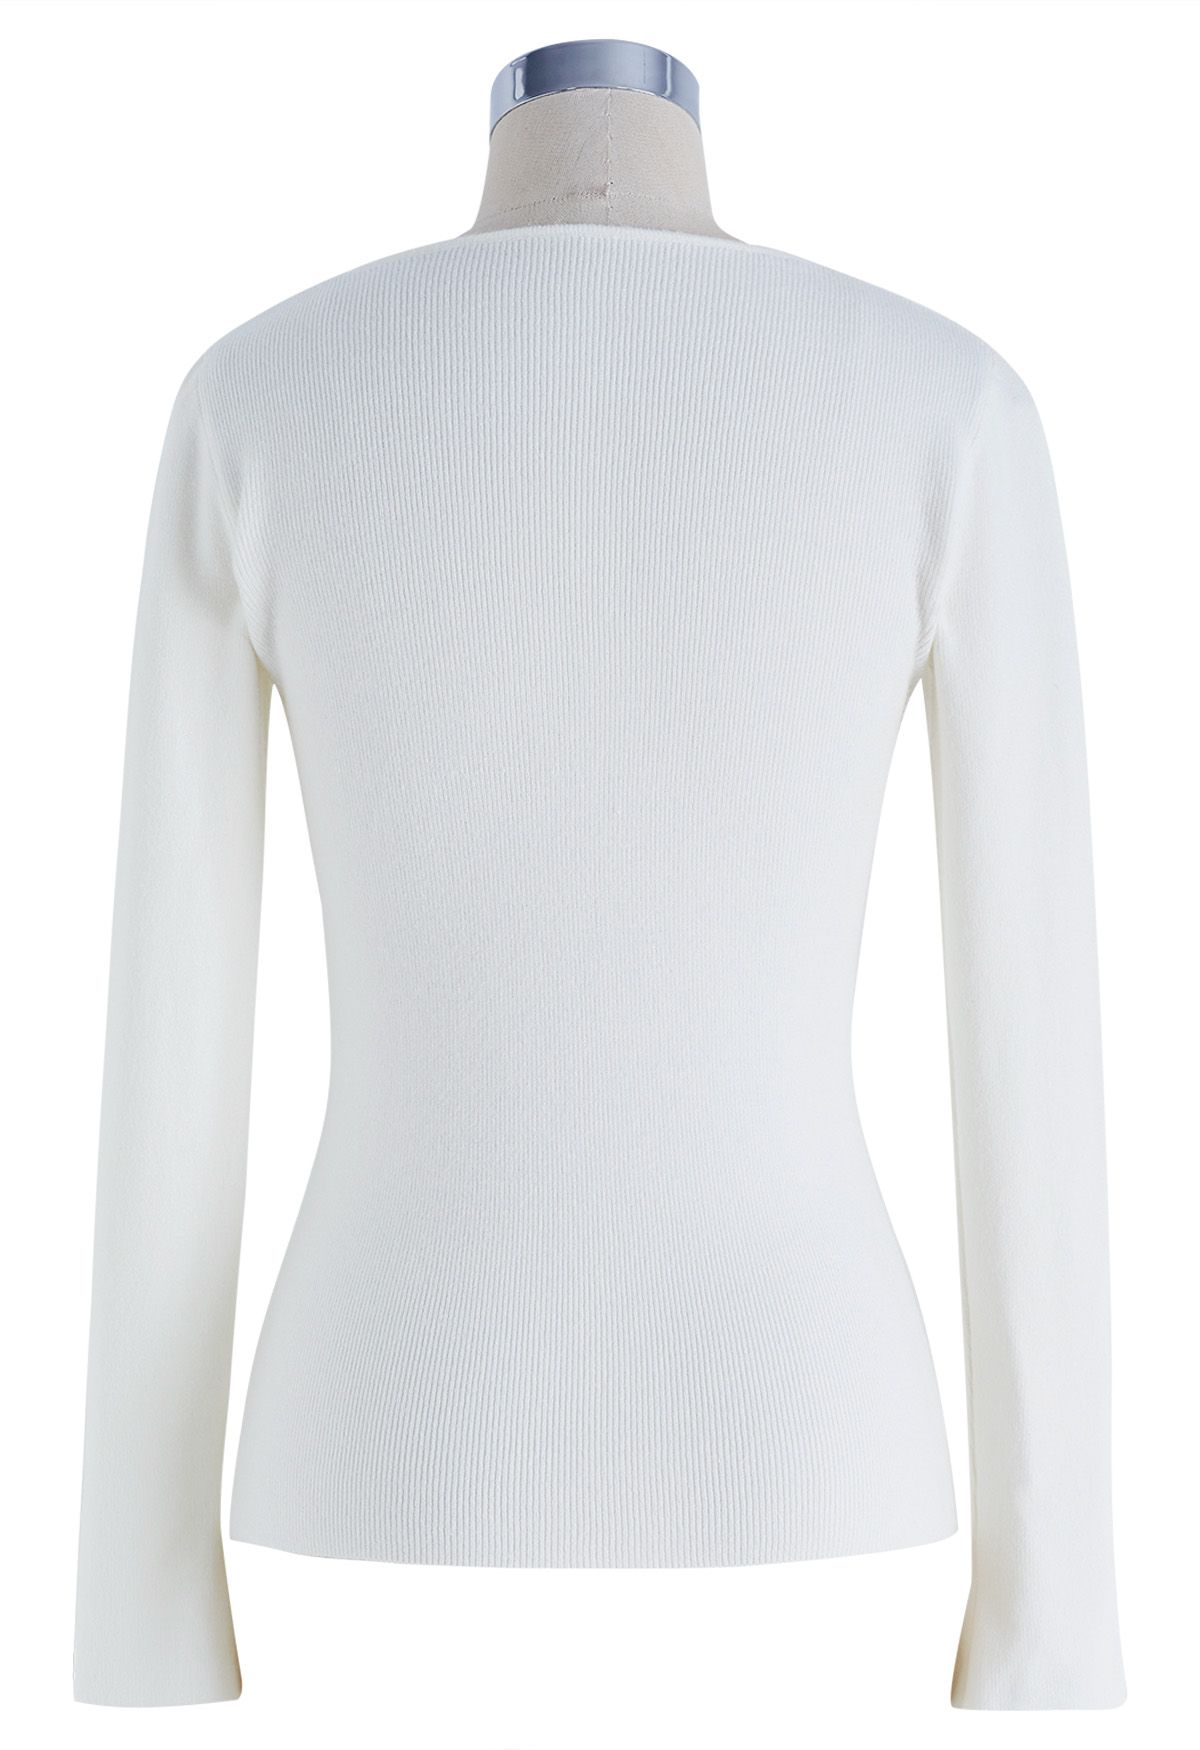 Notch Neckline Fitted Knit Top in Ivory